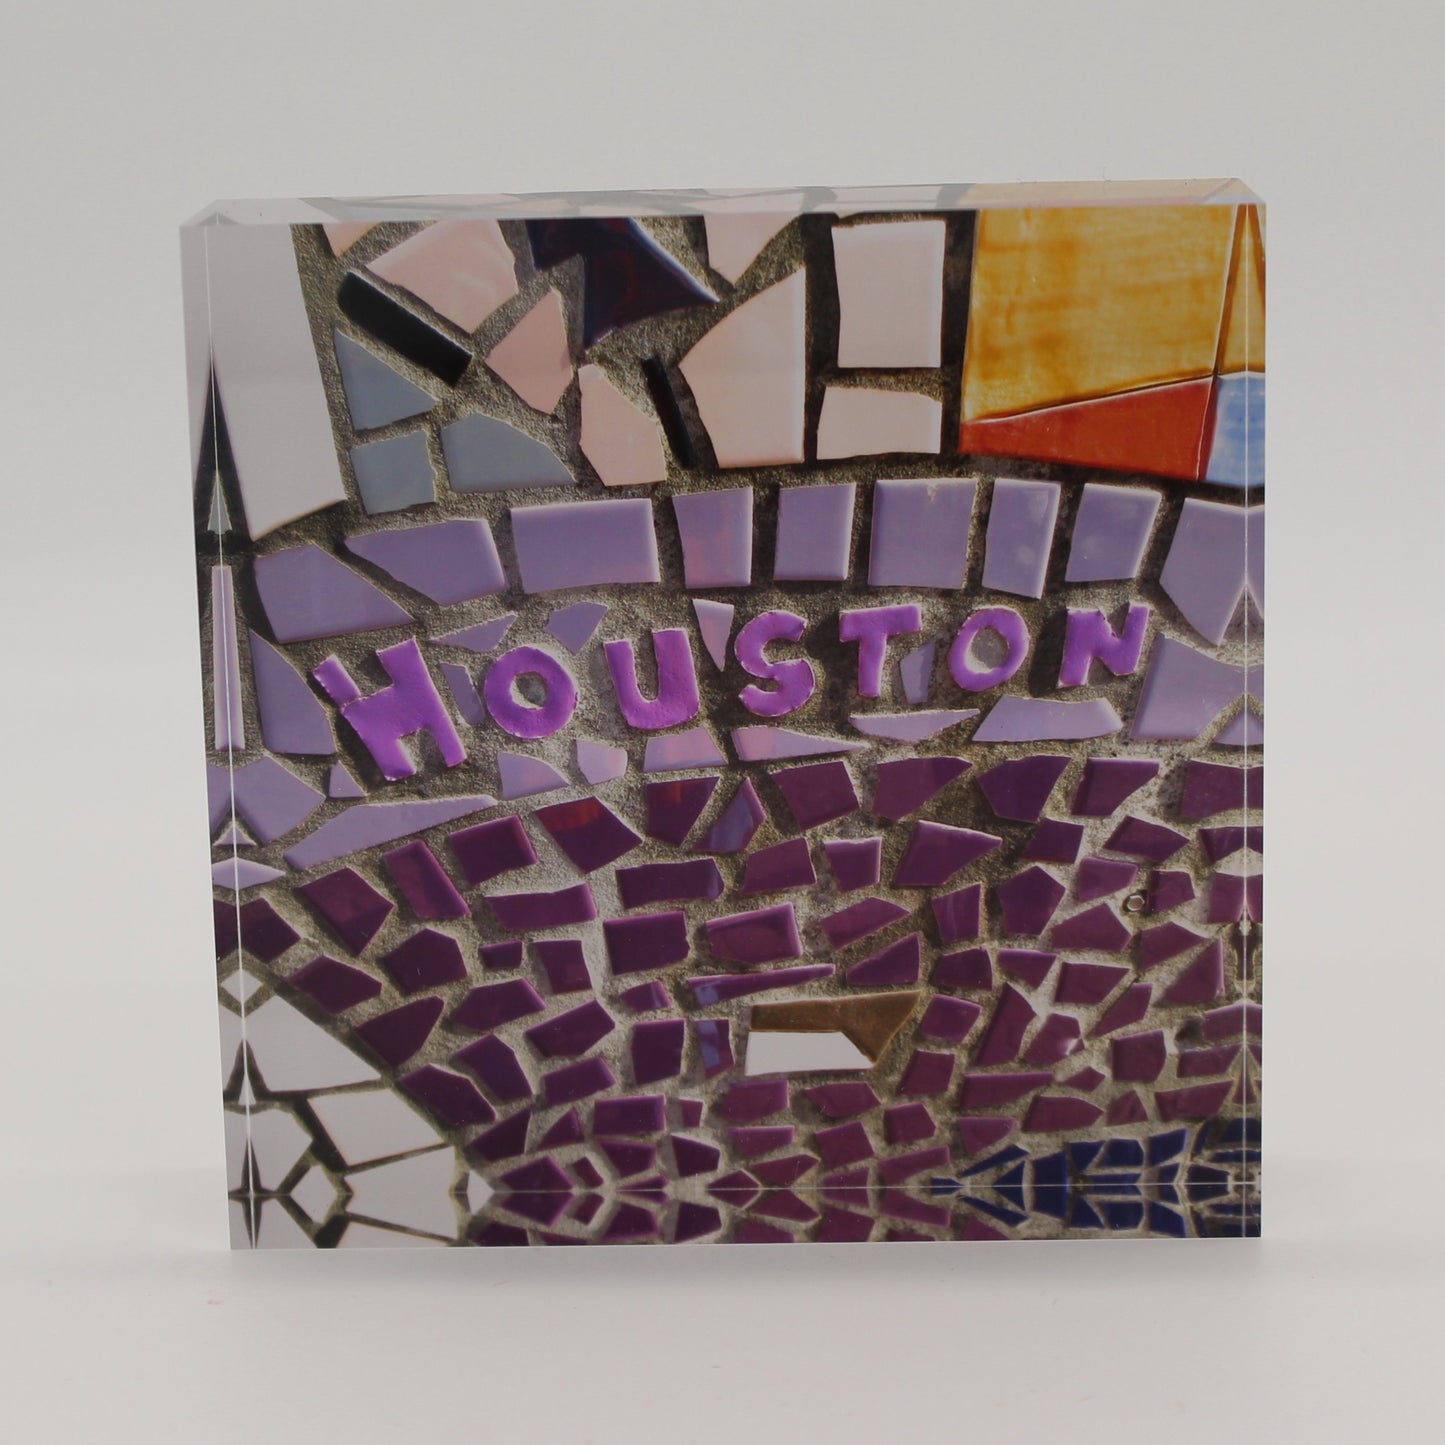 Acrylic block picture of mosaic tiles spelling Houston